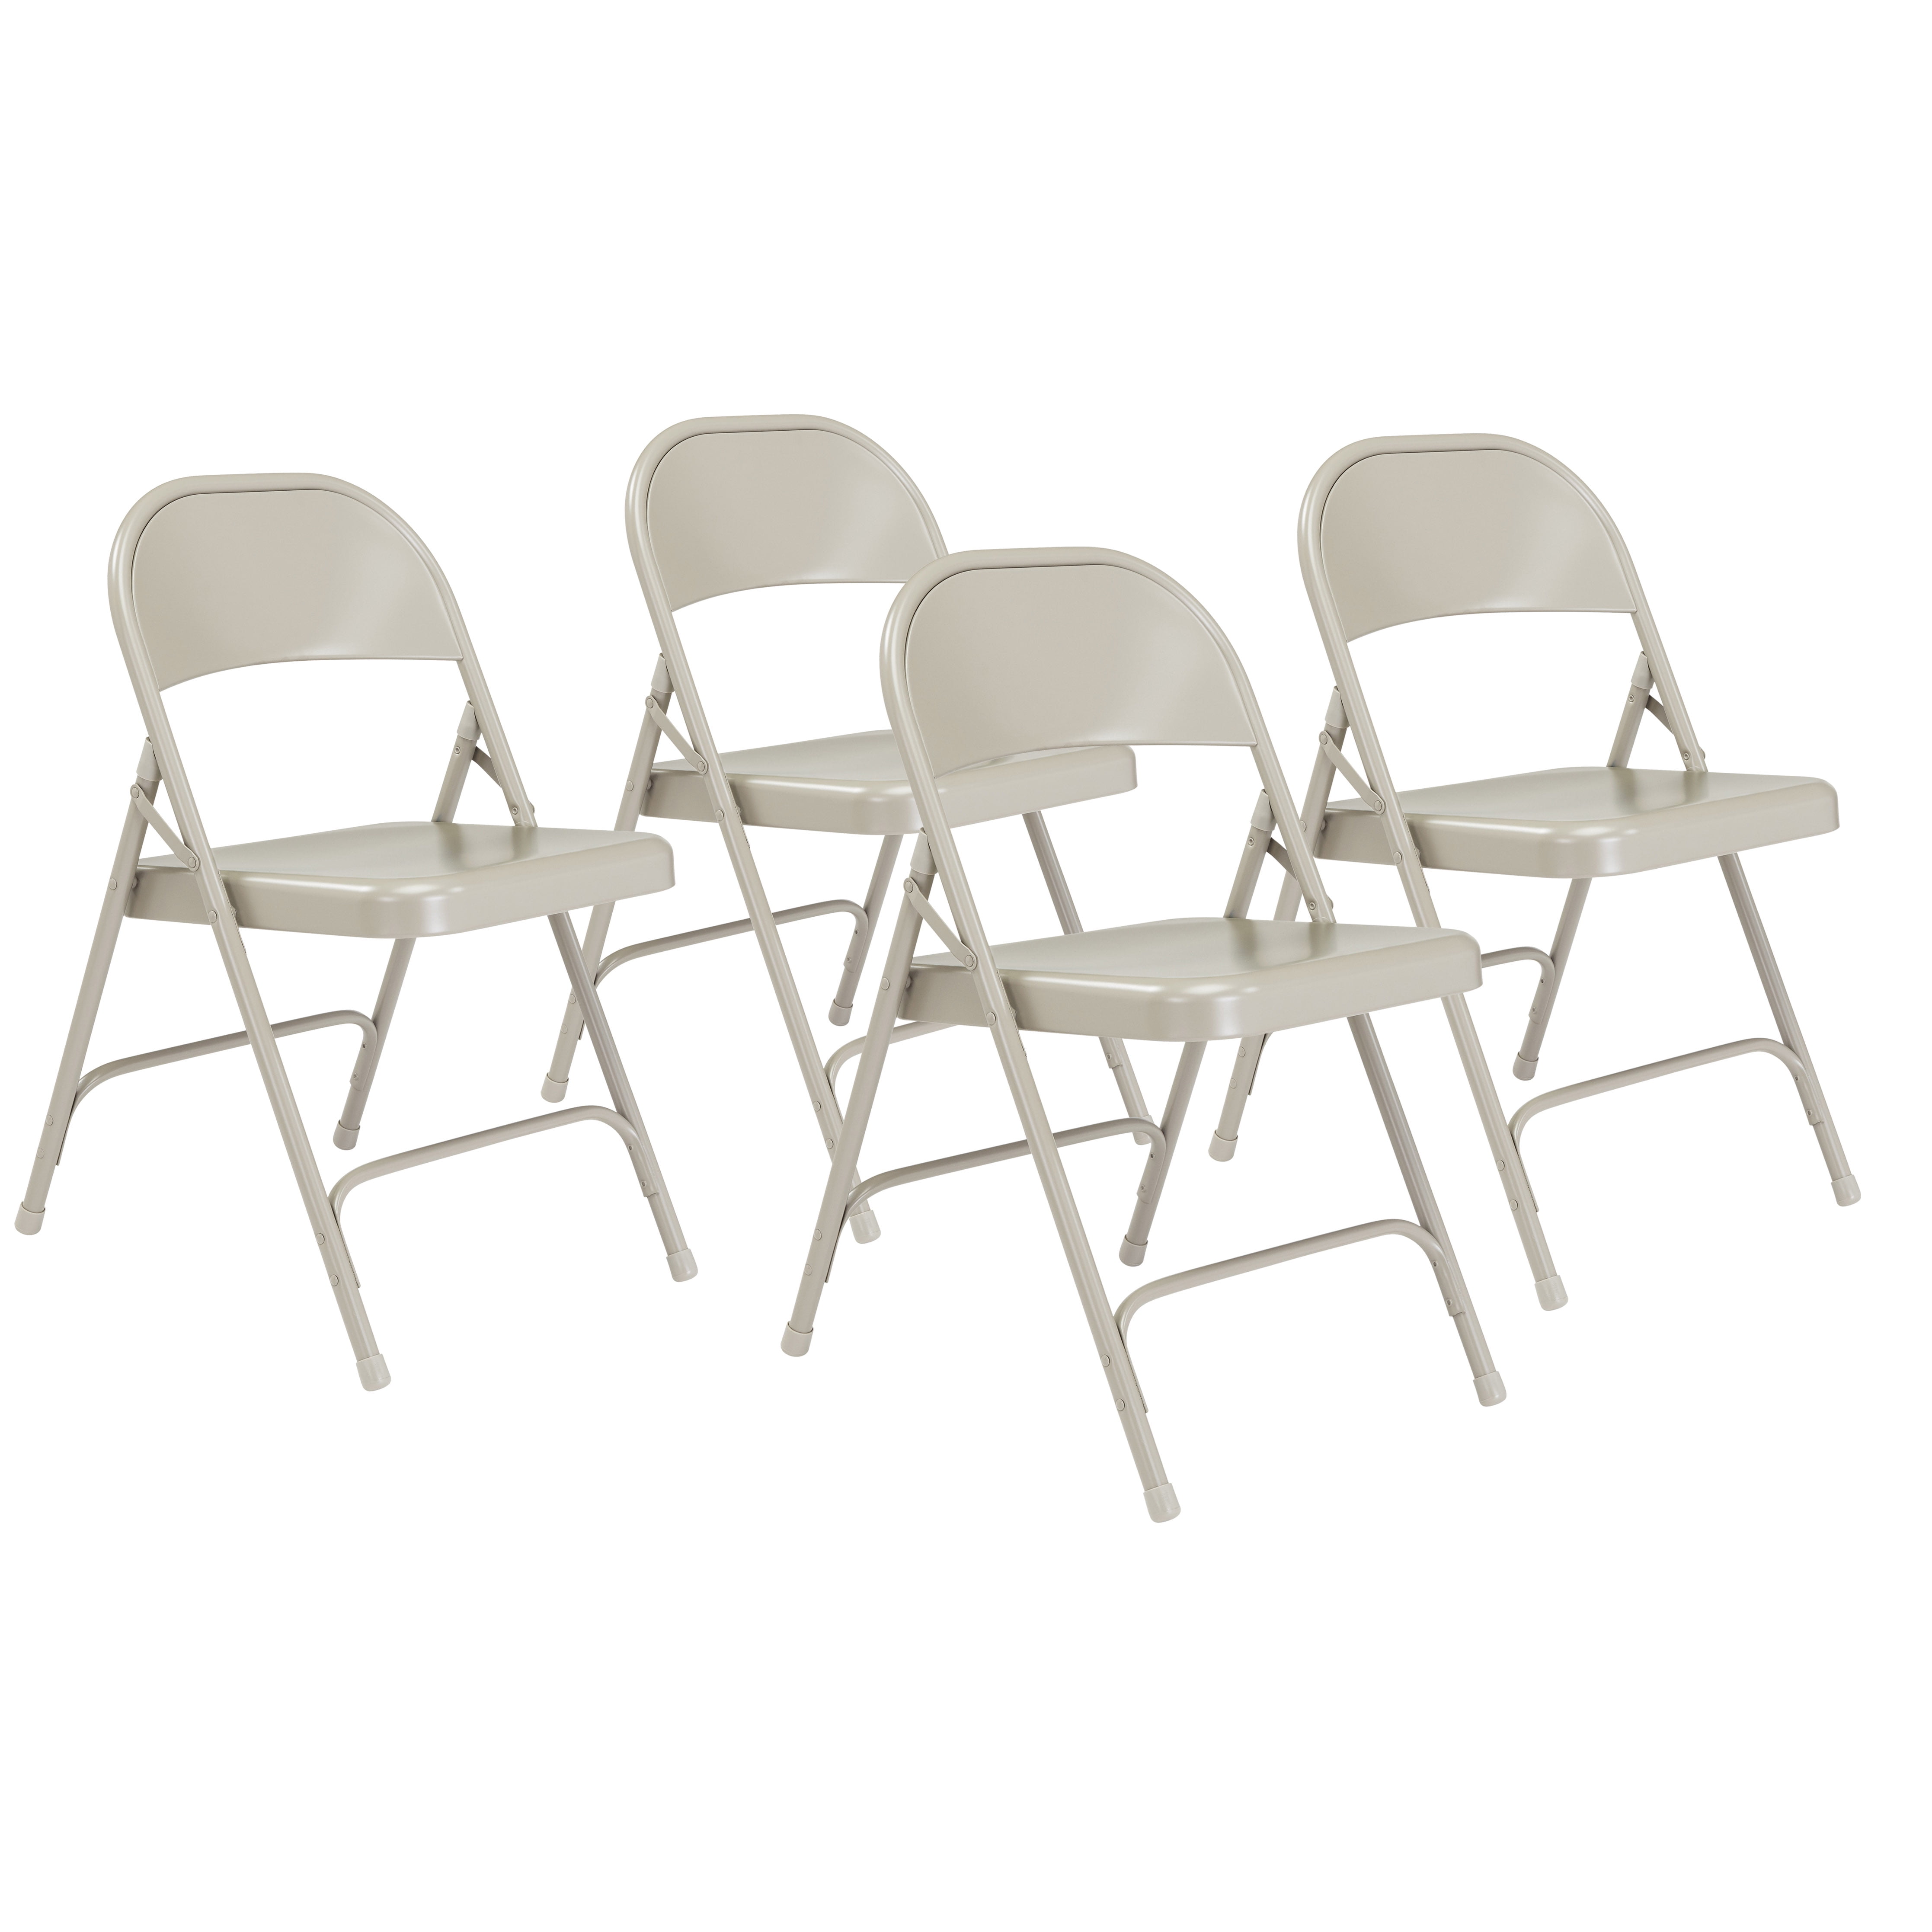 Low Profile Flat Nail-in Glides Feet Wood Table Chairs Set of 50 & Stools NC 